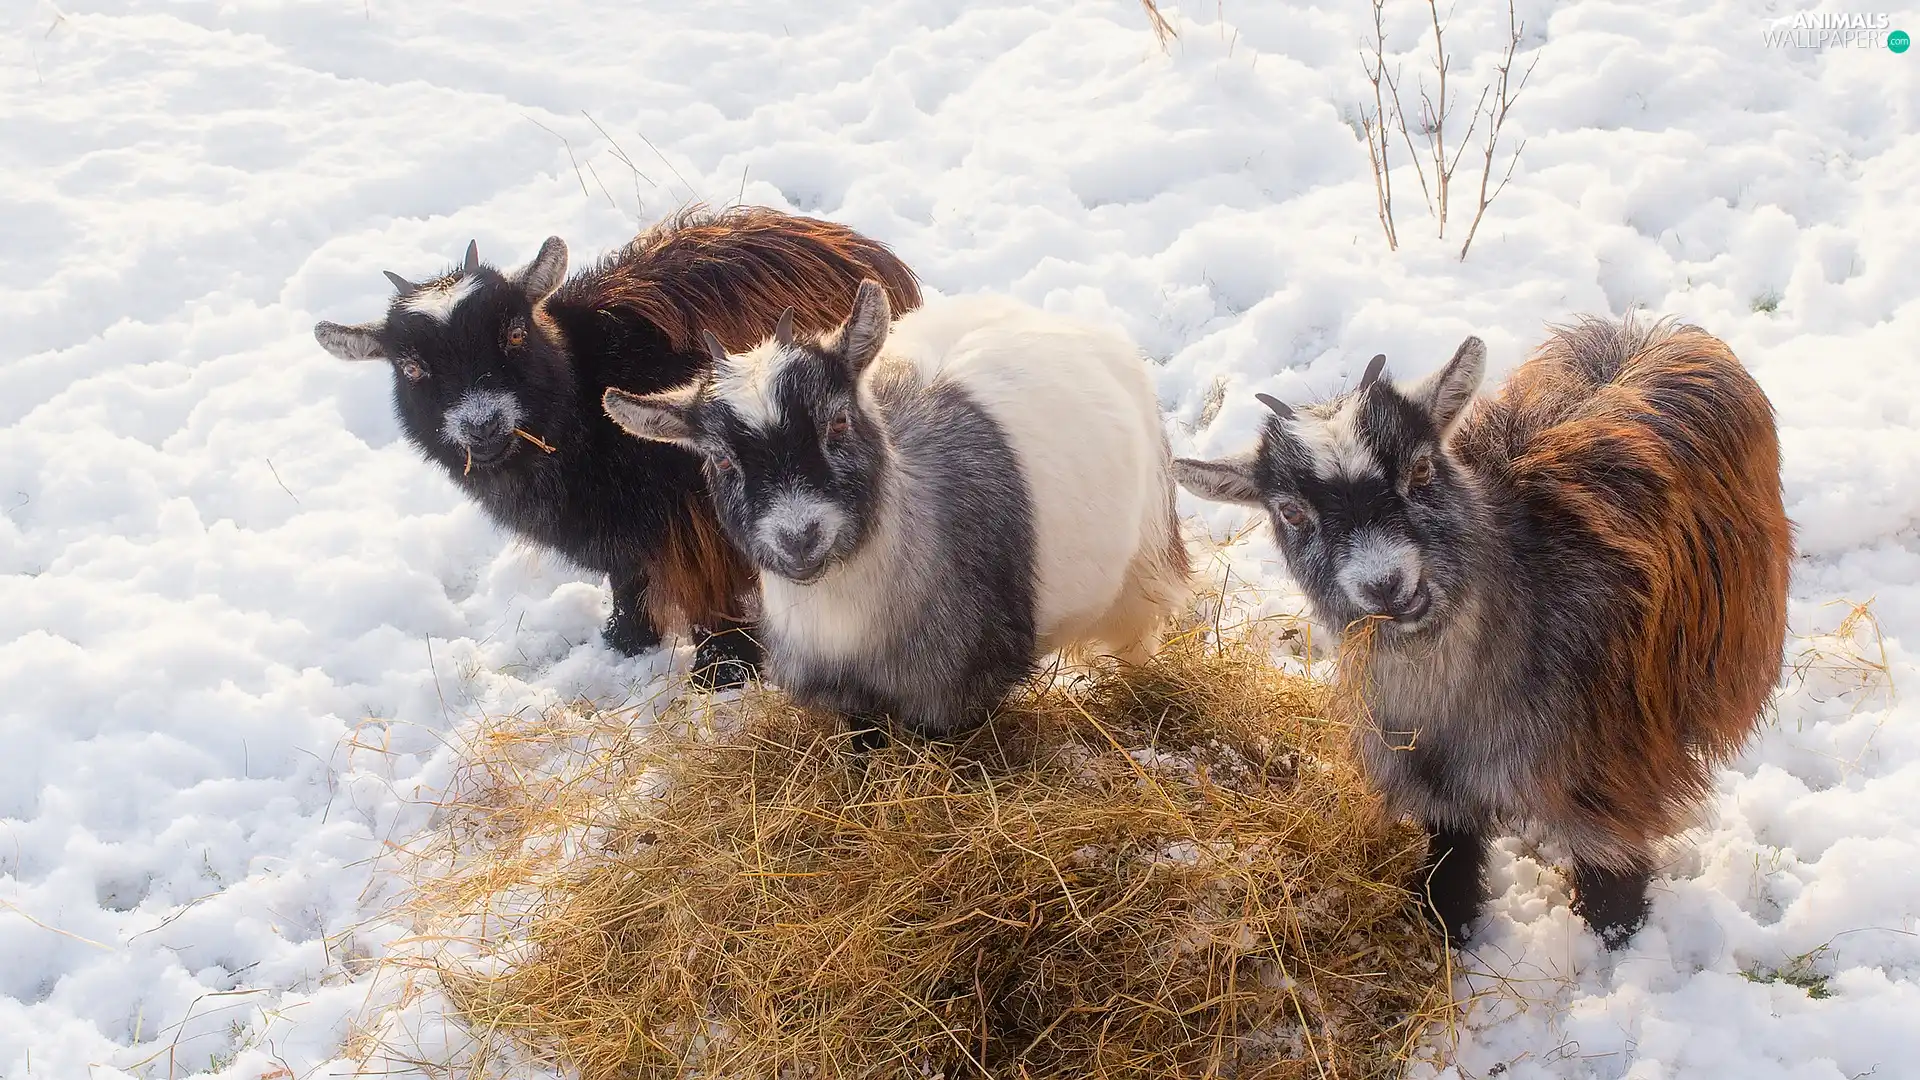 Hay, snow, young, Goats, Three